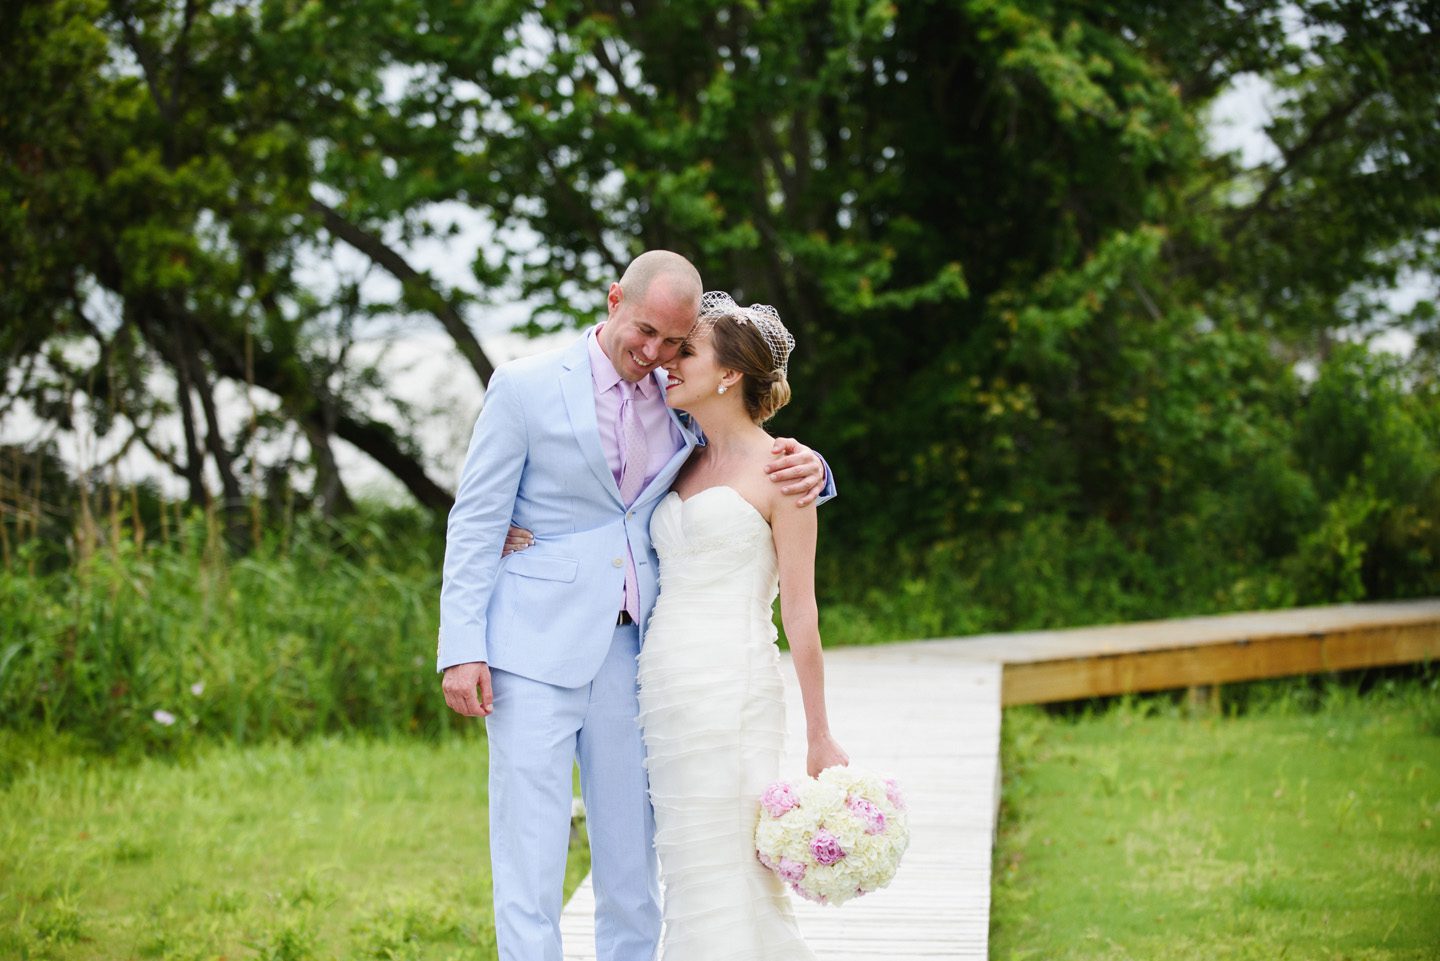 Outer Banks Wedding at the Grade Ritz Palm Photographers Neil GT Photography Walking Portraits